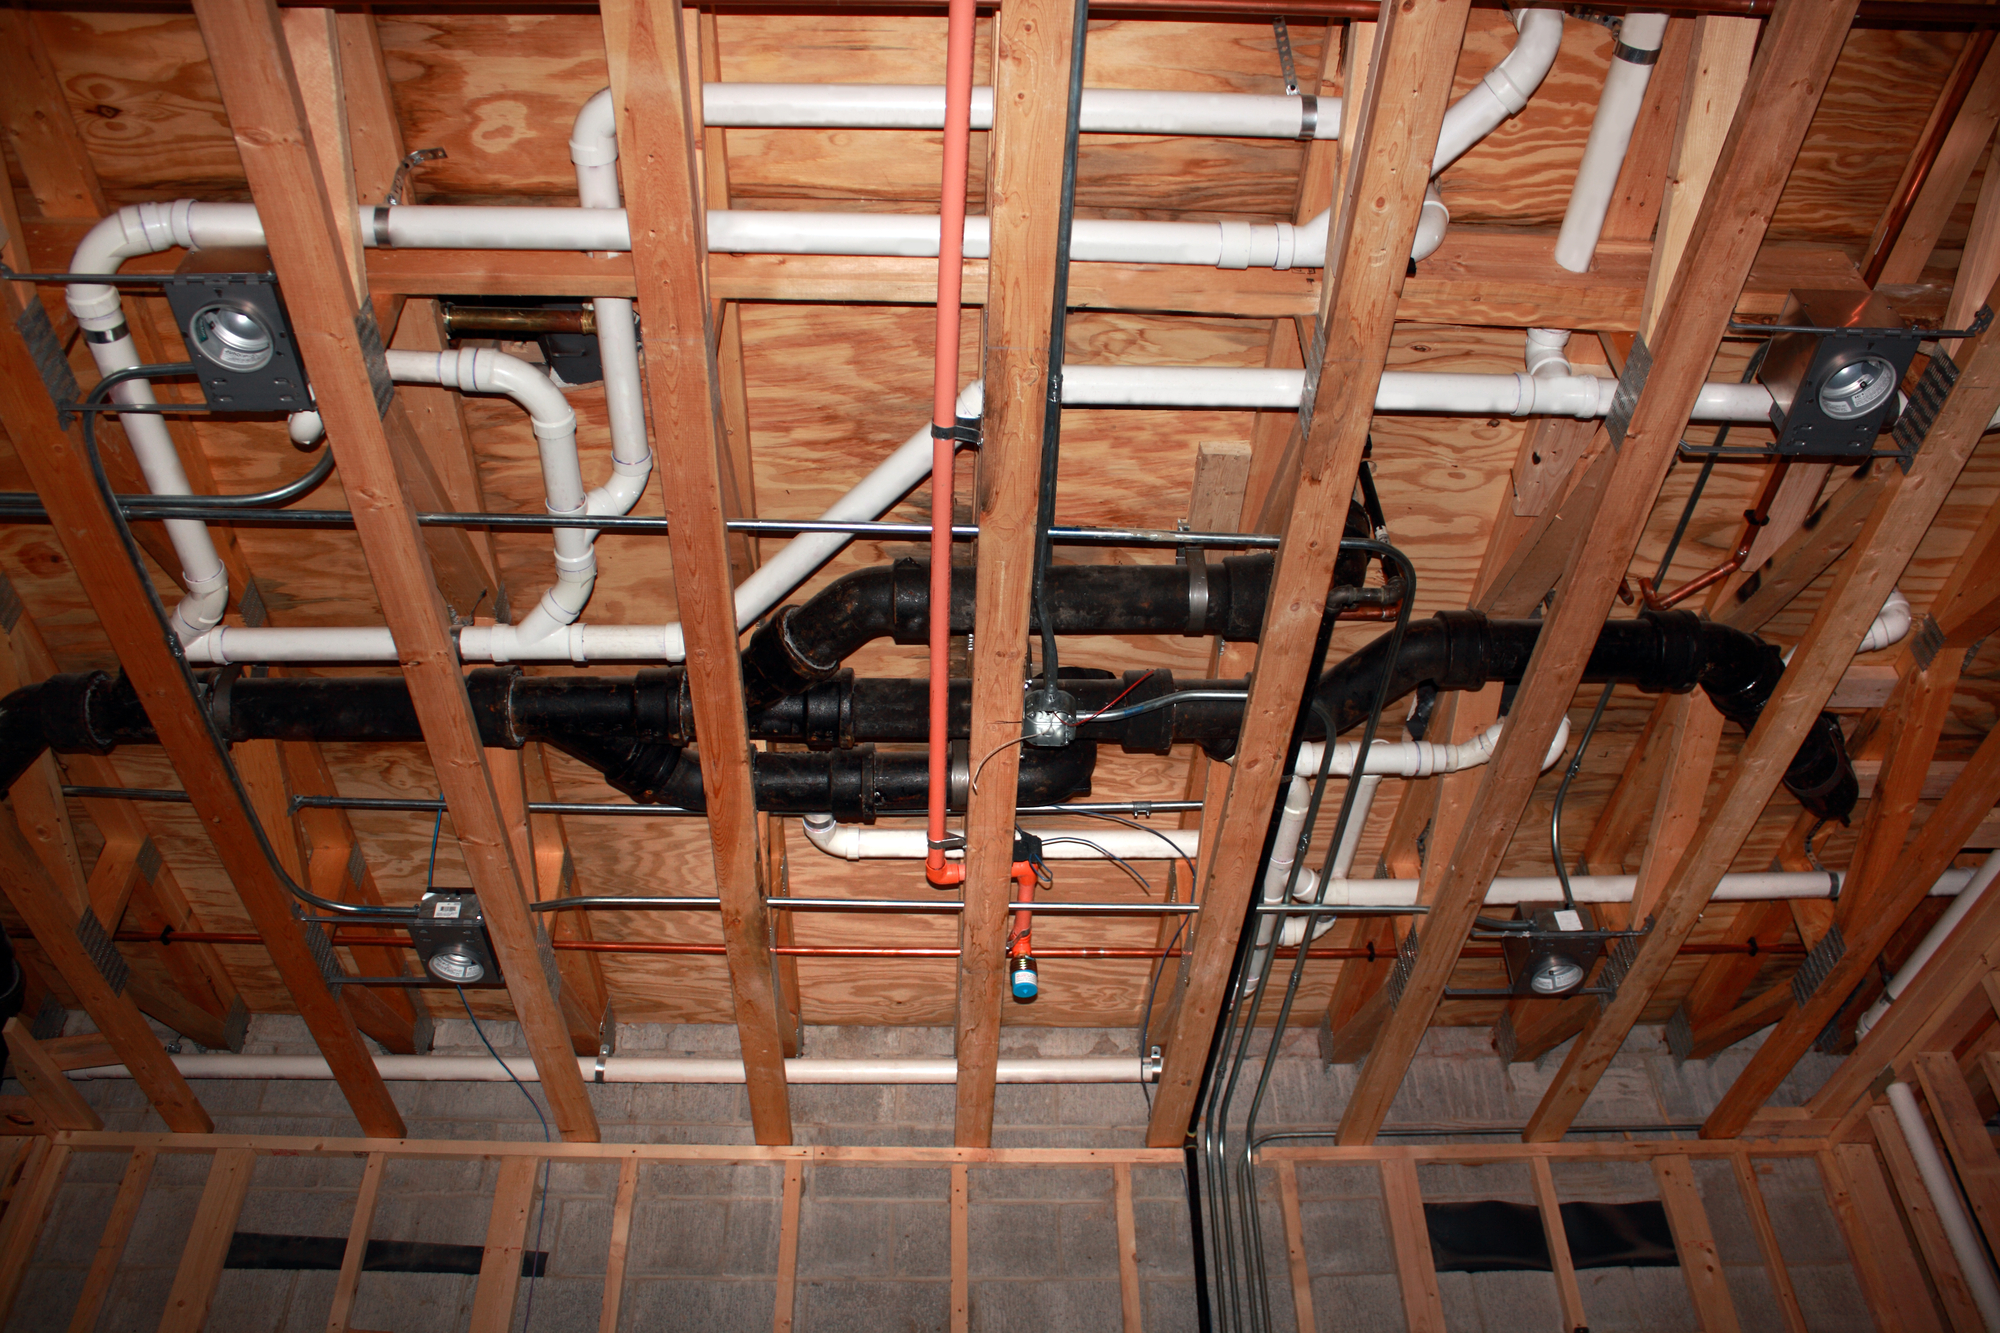 Renovating With Safety In Mind: Electrical Considerations For Home Remodels